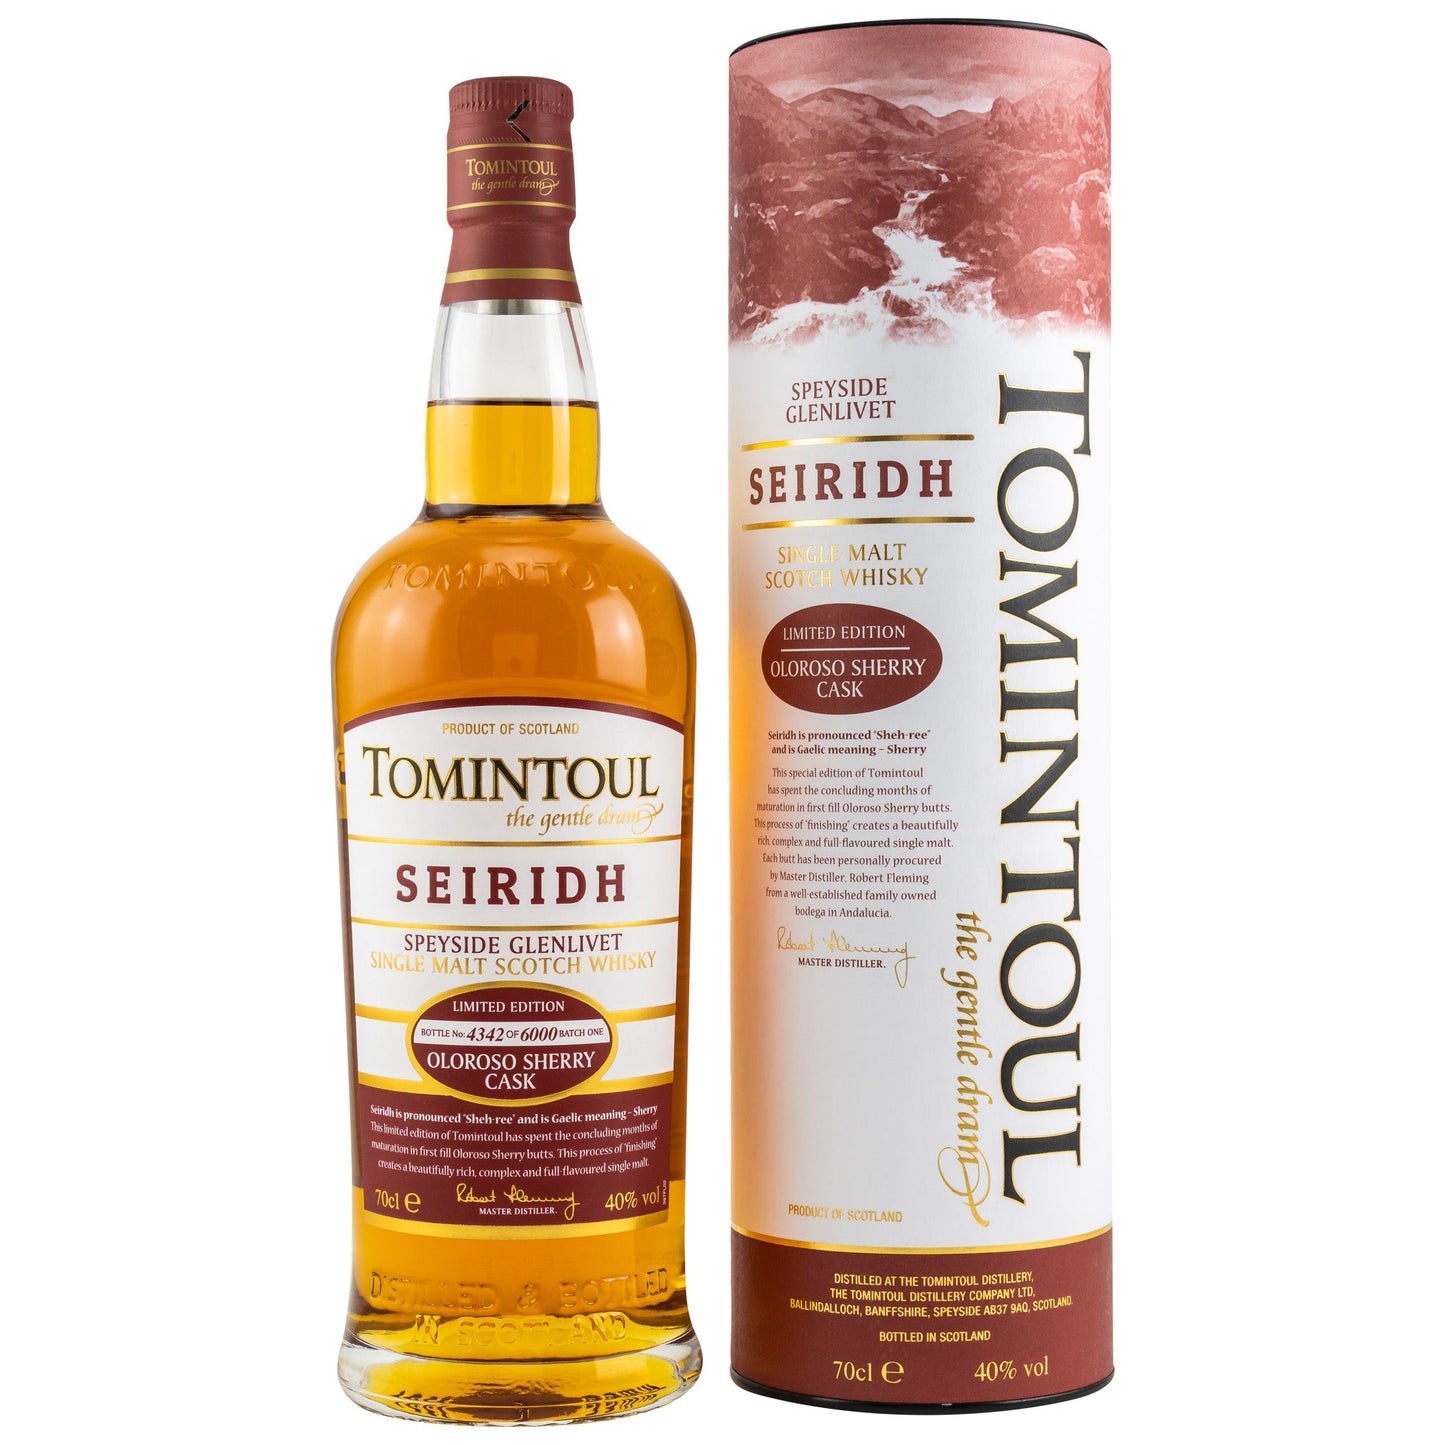 Tomintoul | Seiridh | Oloroso Sherry Finish | 40%GET A BOTTLE